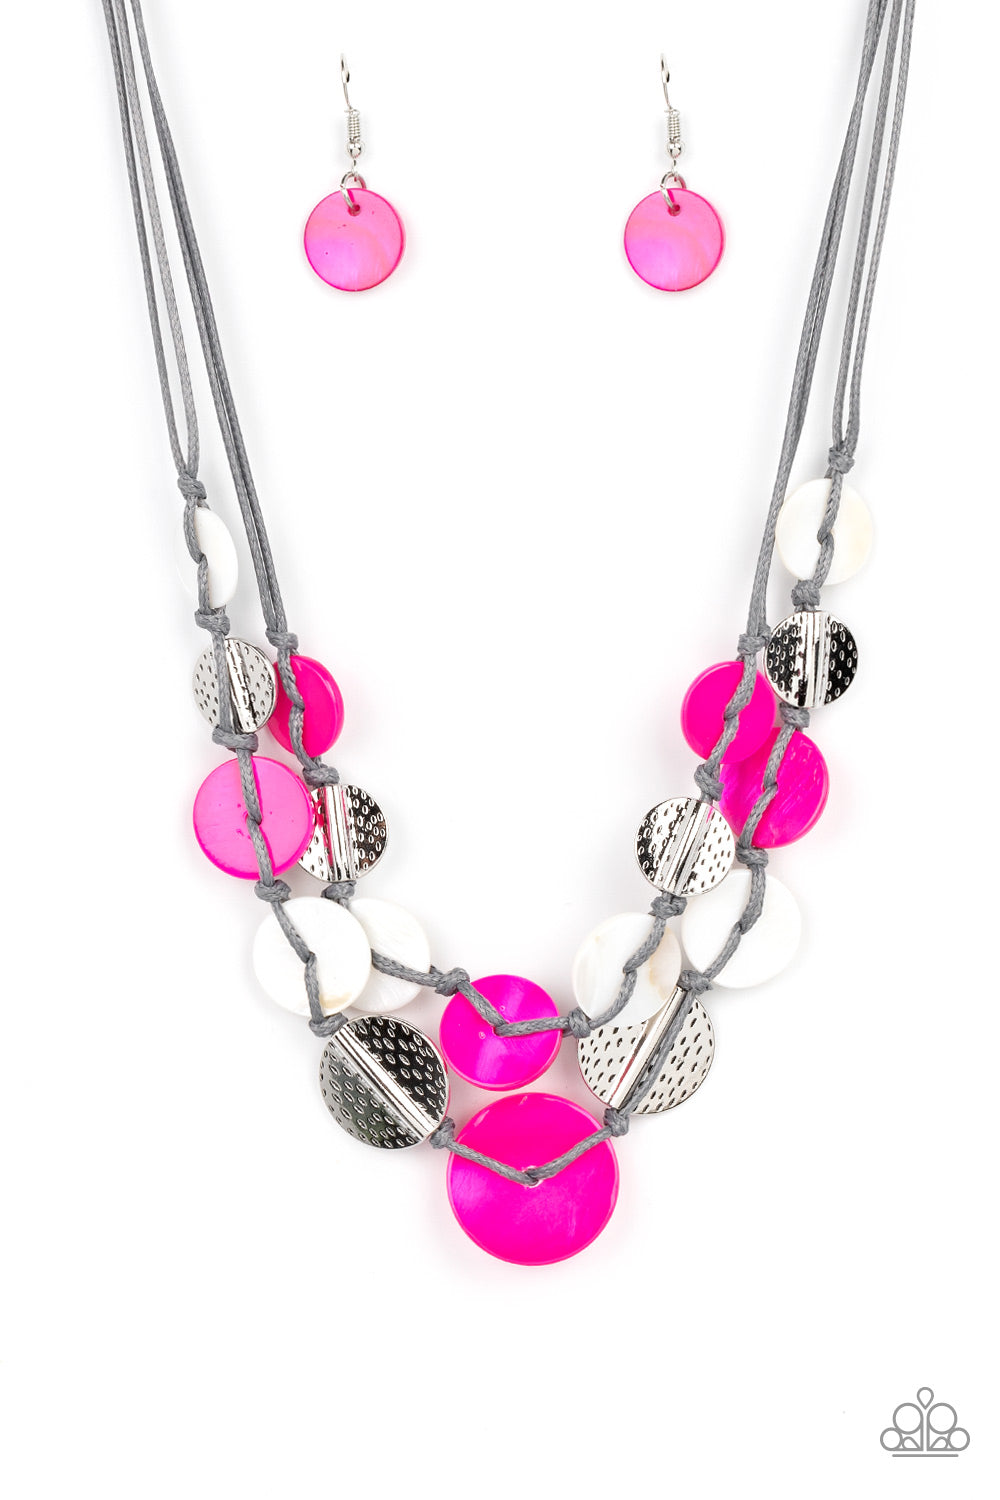 Paparazzi Accessories - Vibrant pink and white shells interlace with silver dotted, hammered discs to create a refined pop of color. Held together by soft gray cording, this piece will blend in with beaches near you!